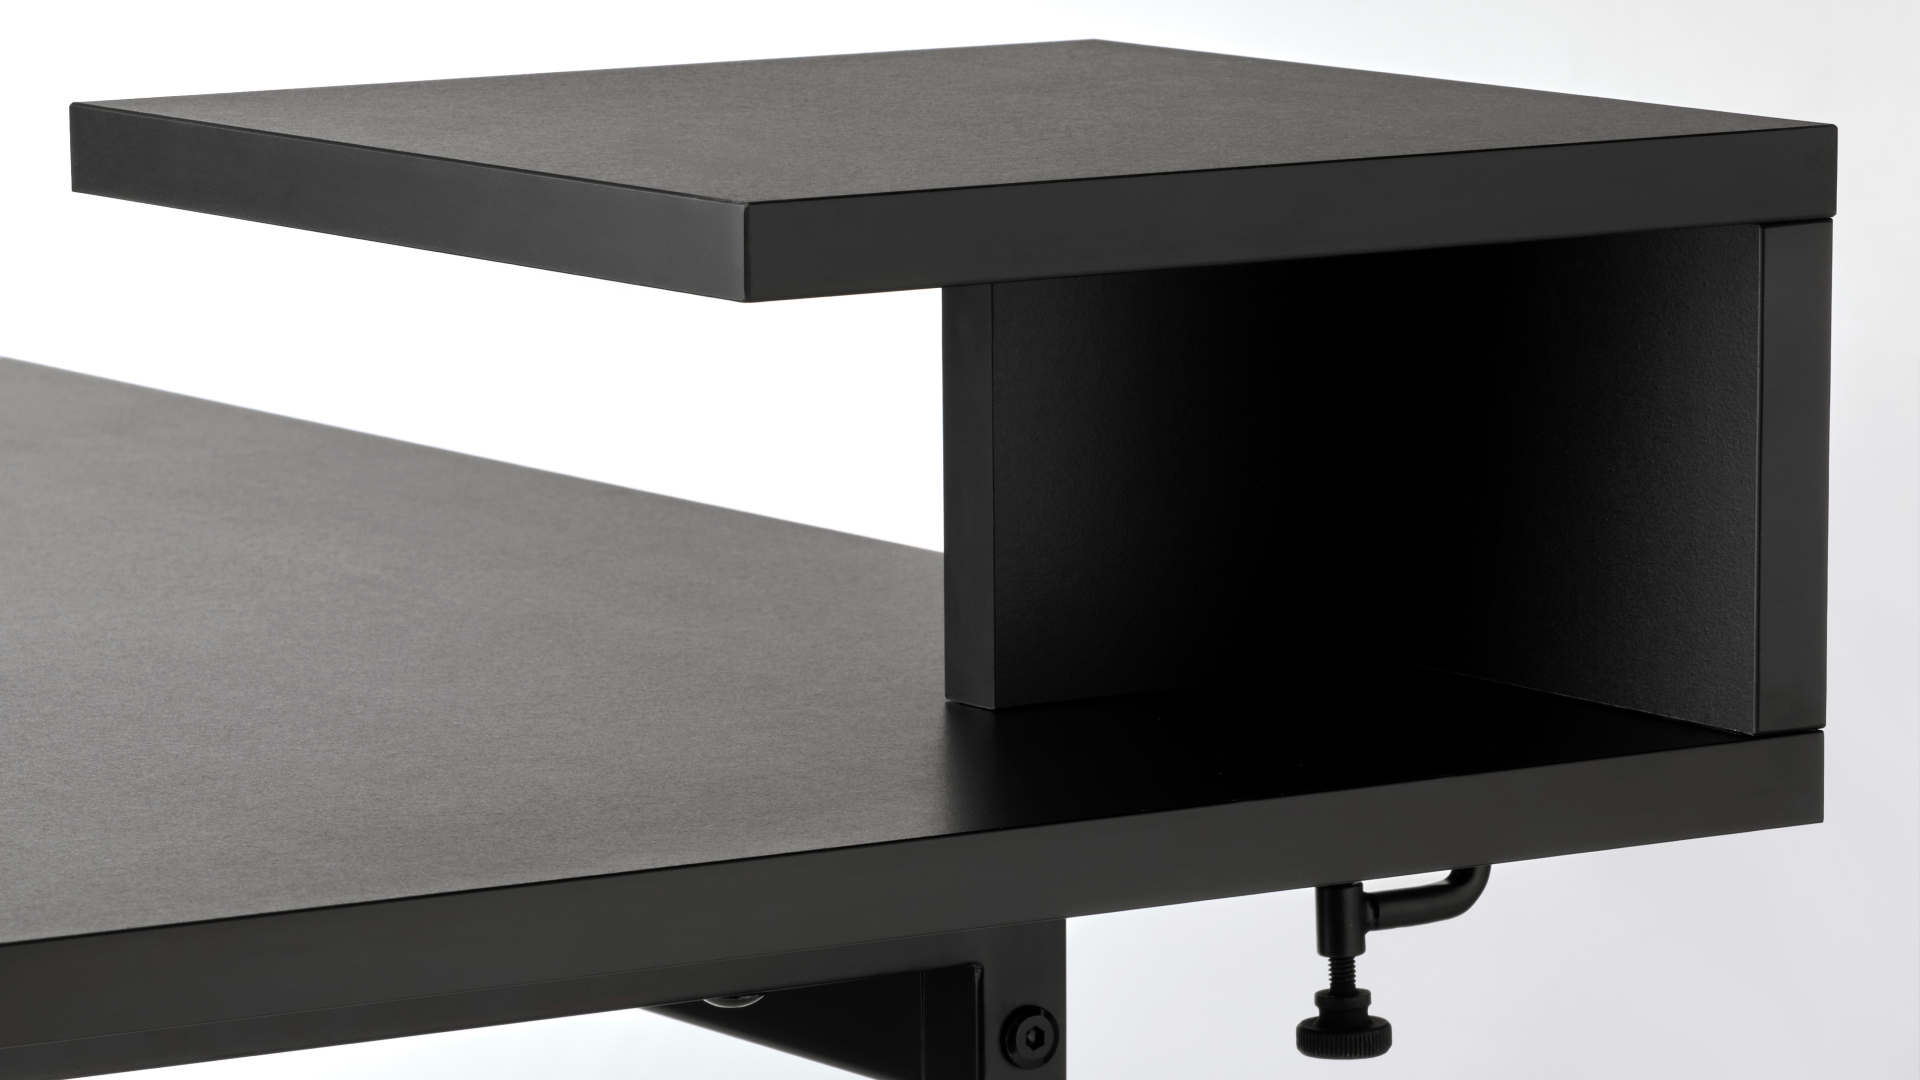 Detail of the Ikea Obegransad table in black on a white background